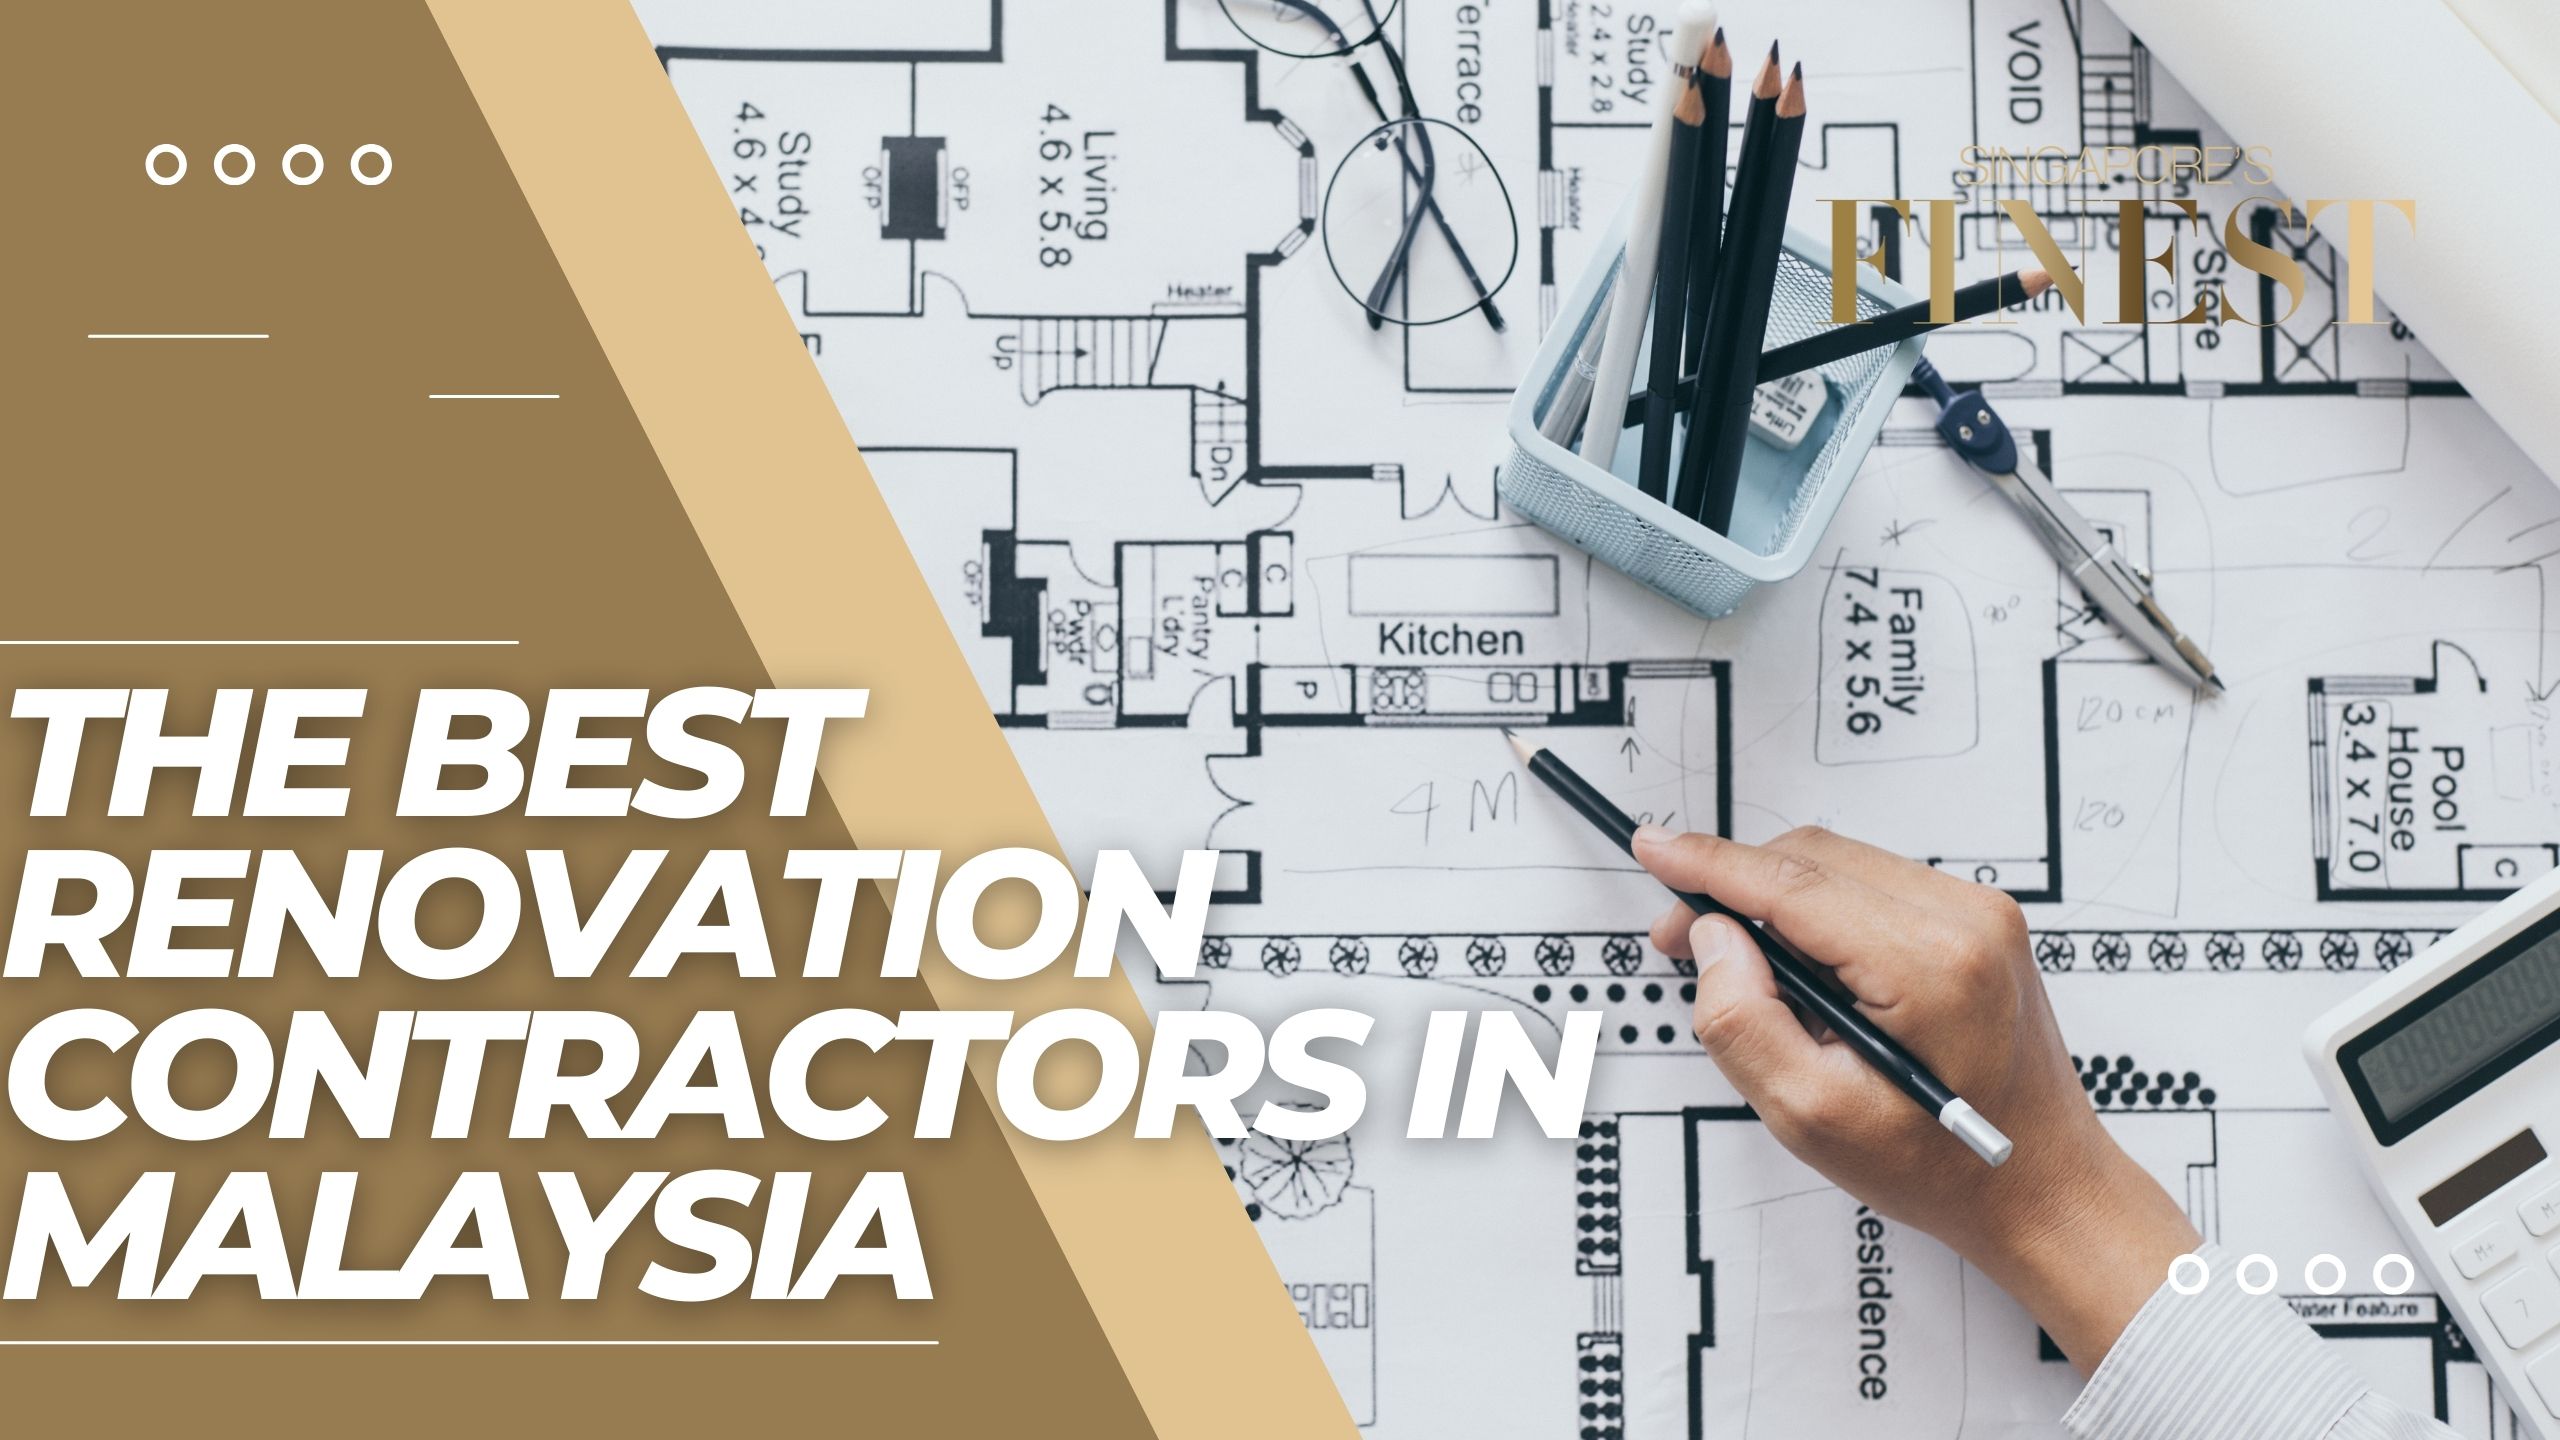 The Finest Renovation Contractors in Malaysia